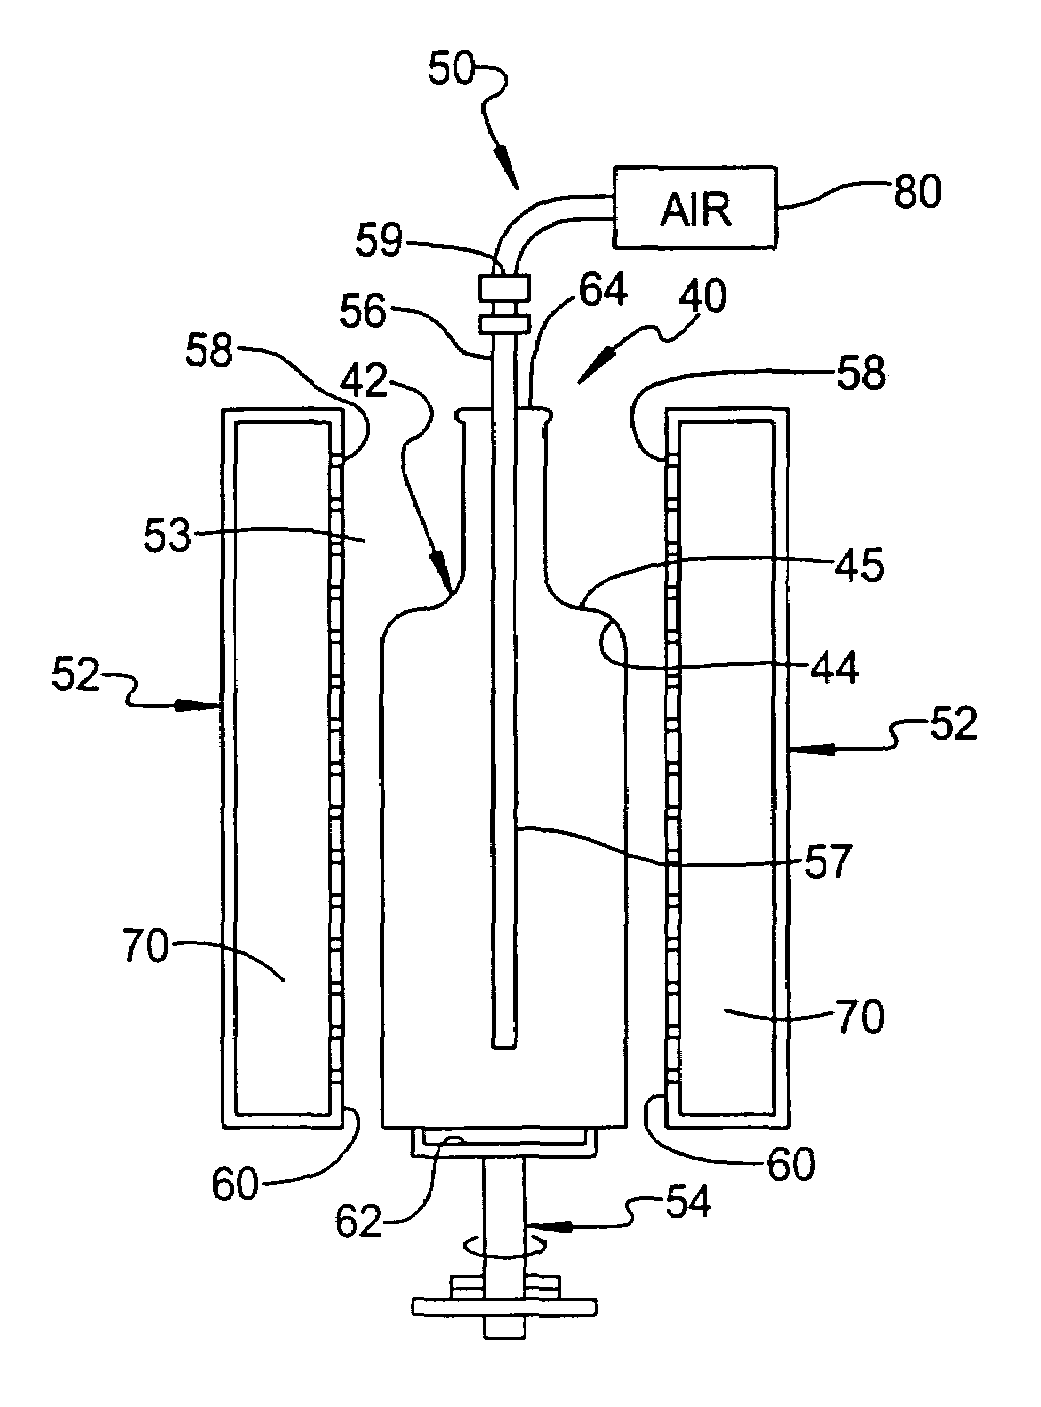 System and method for tempering glass containers